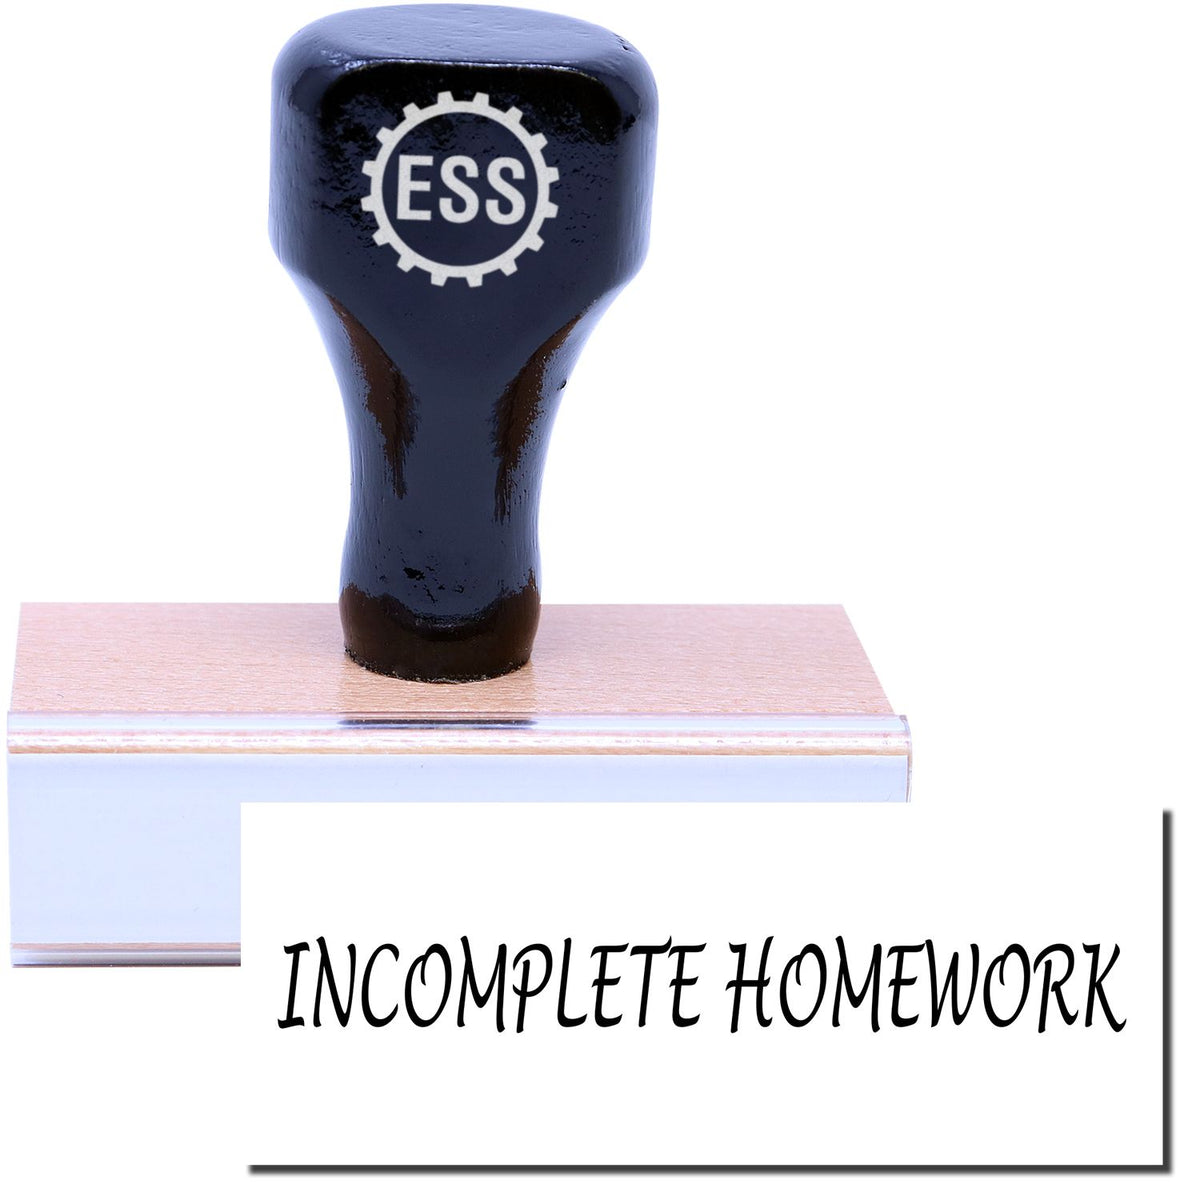 A stock office rubber stamp with a stamped image showing how the text &quot;INCOMPLETE HOMEWORK&quot; in a large font is displayed after stamping.